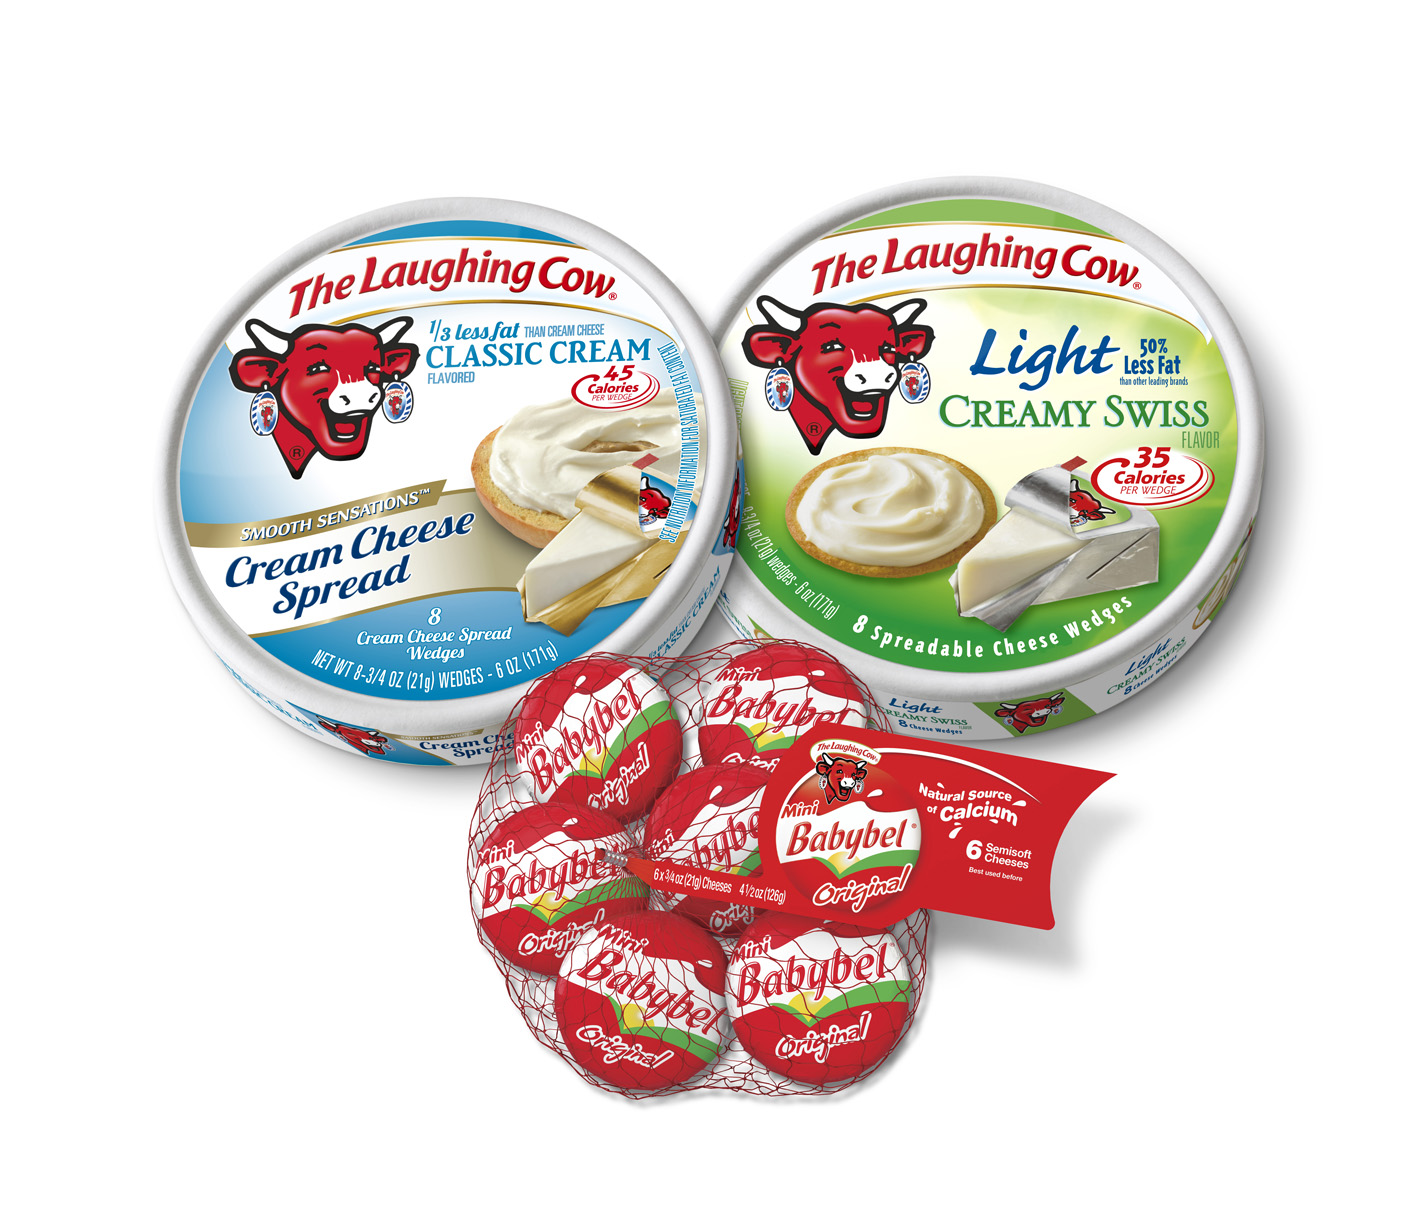 Bel Brands USA manufactures and markets The Laughing Cow and Mini Babybel -...